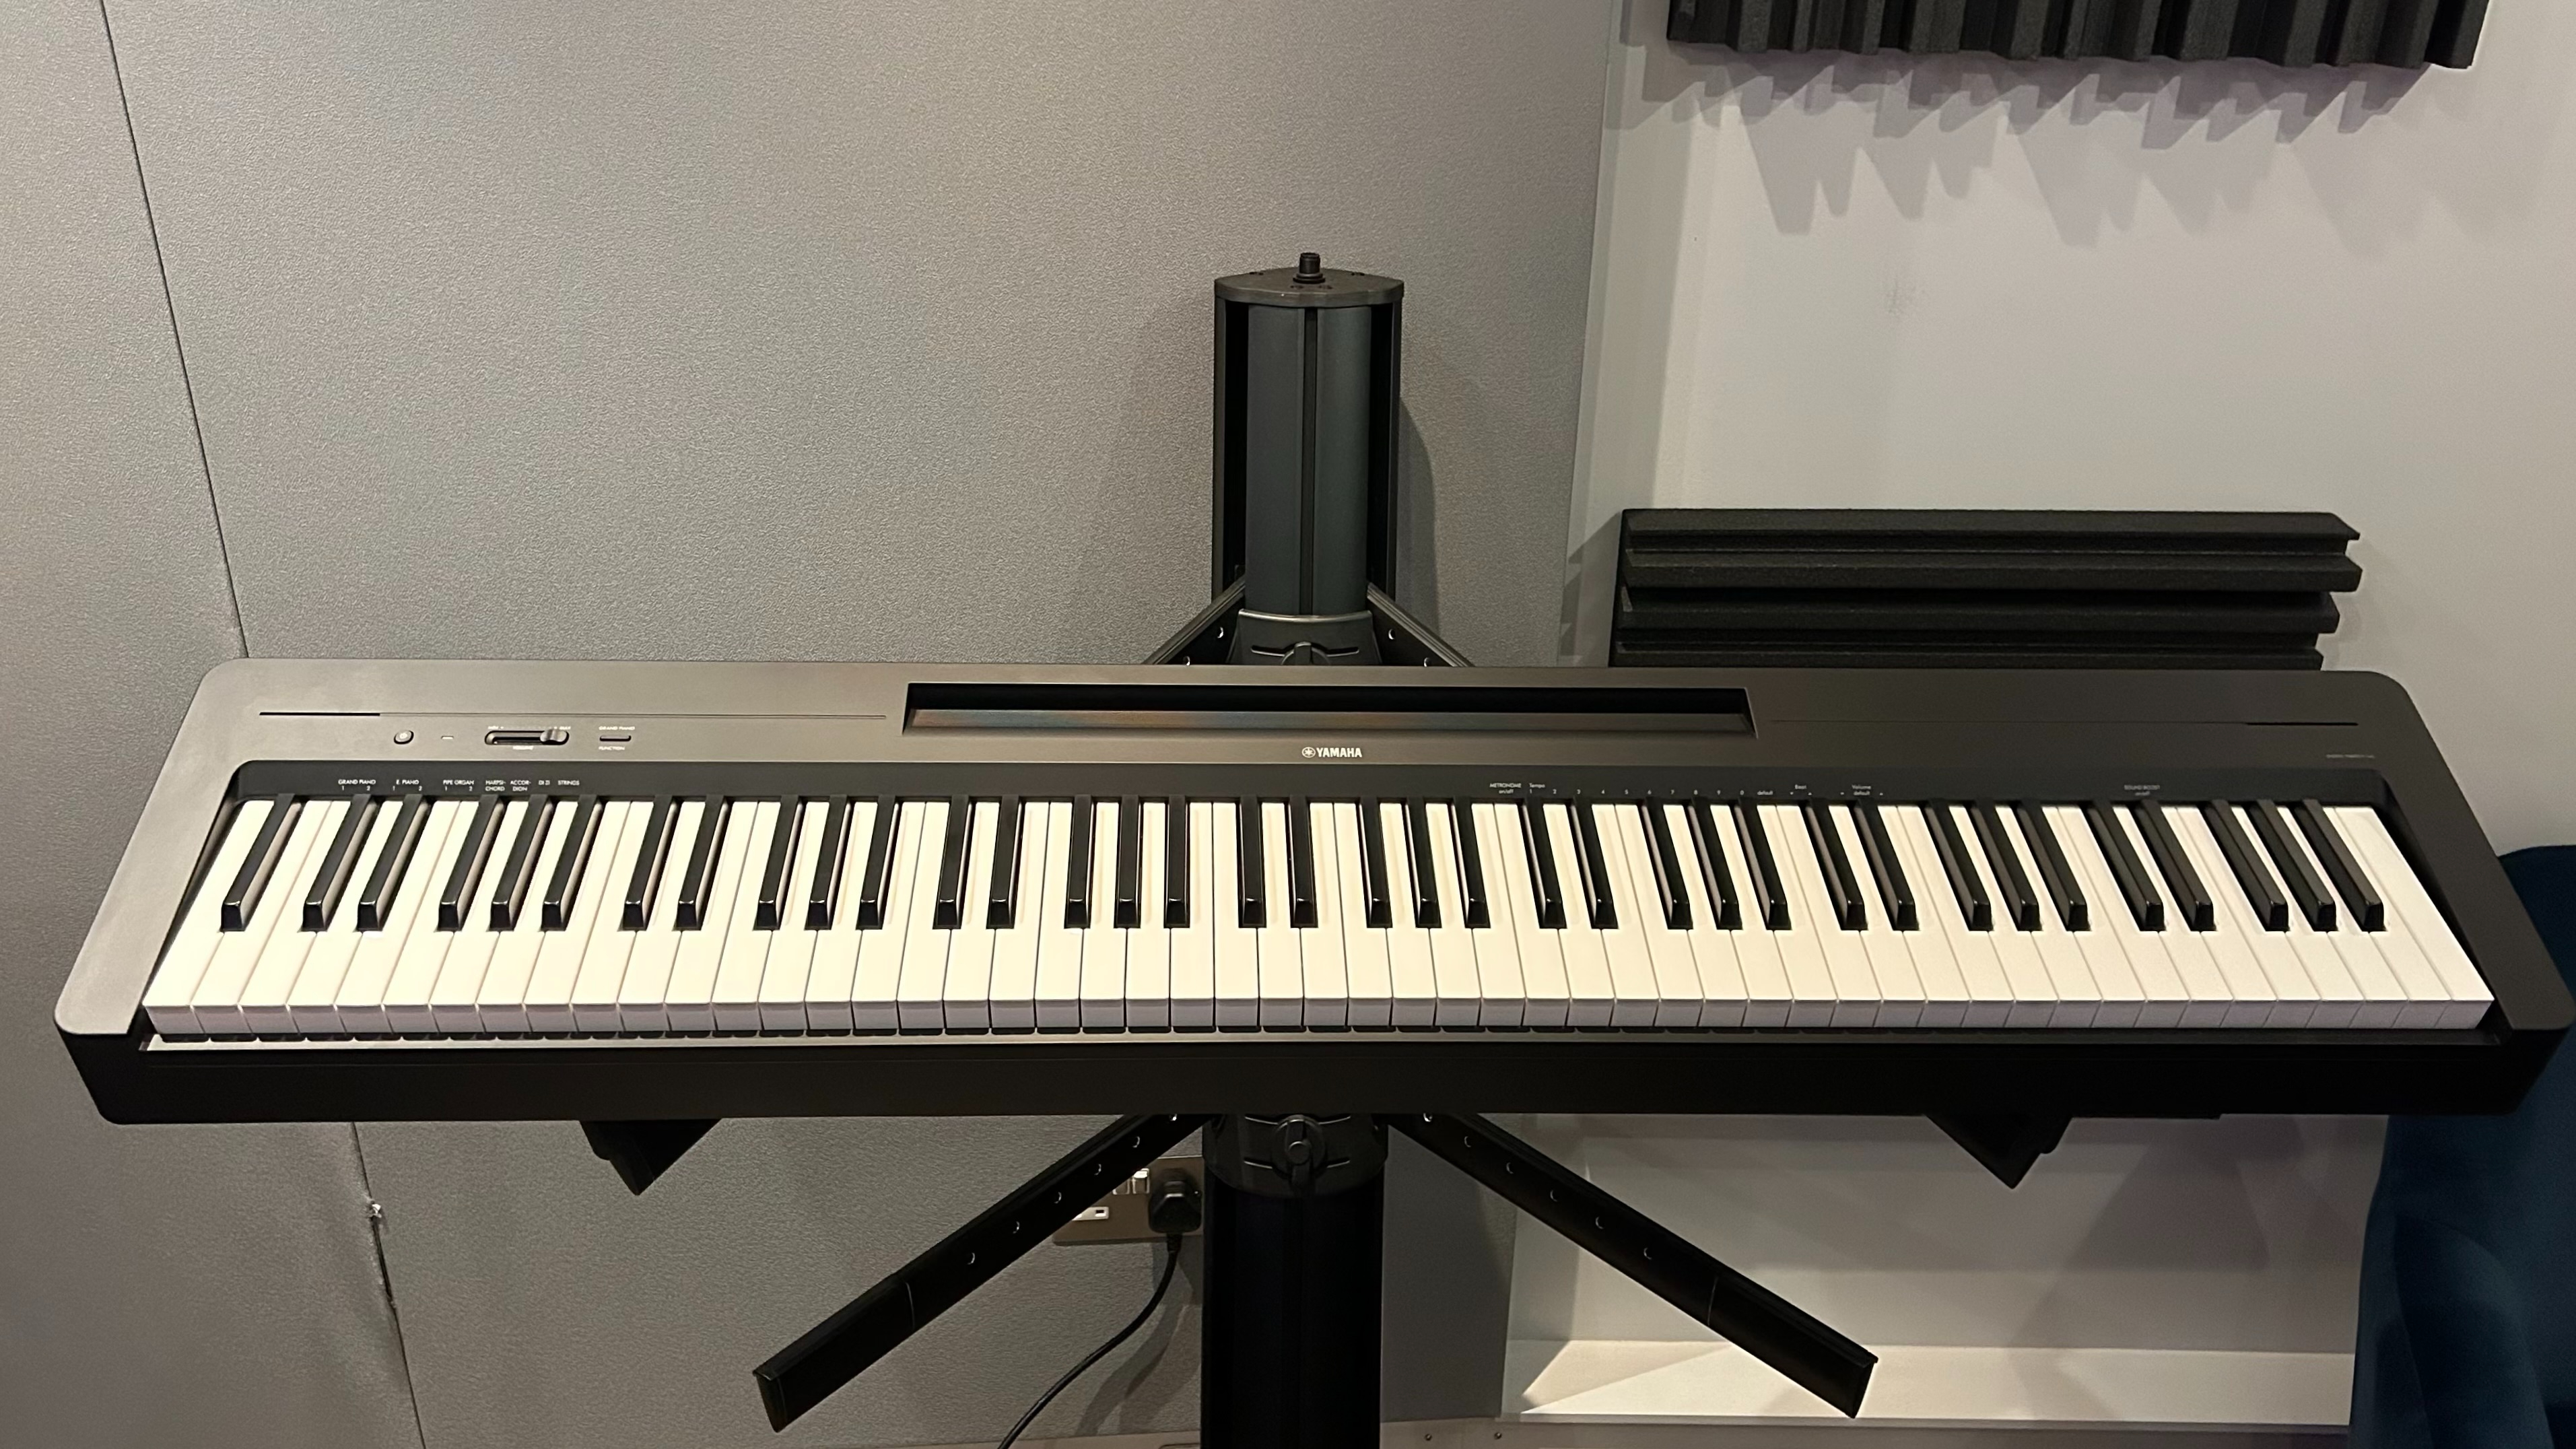 Yamaha P-45 Digital Piano with Stand and Headphones